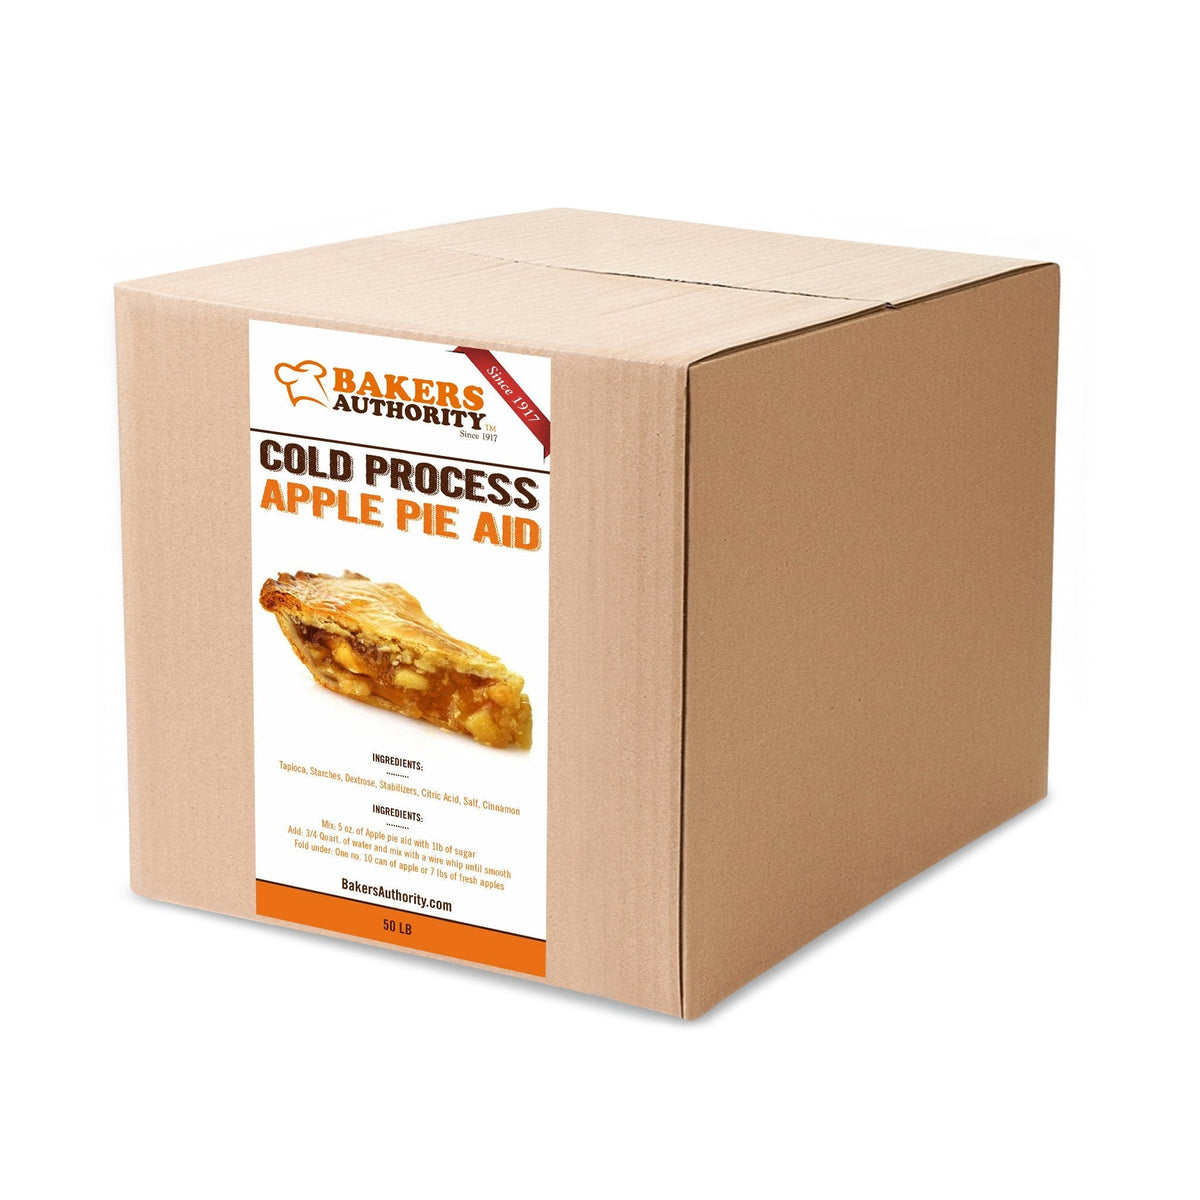 https://www.bakersauthoritys.shop/wp-content/uploads/1692/16/we-offer-apple-pie-stabilizer-50lb-shelko-to-our-valued-customers-at-a-reasonable-cost-and-with-an-excellent-level-of-service_0.jpg